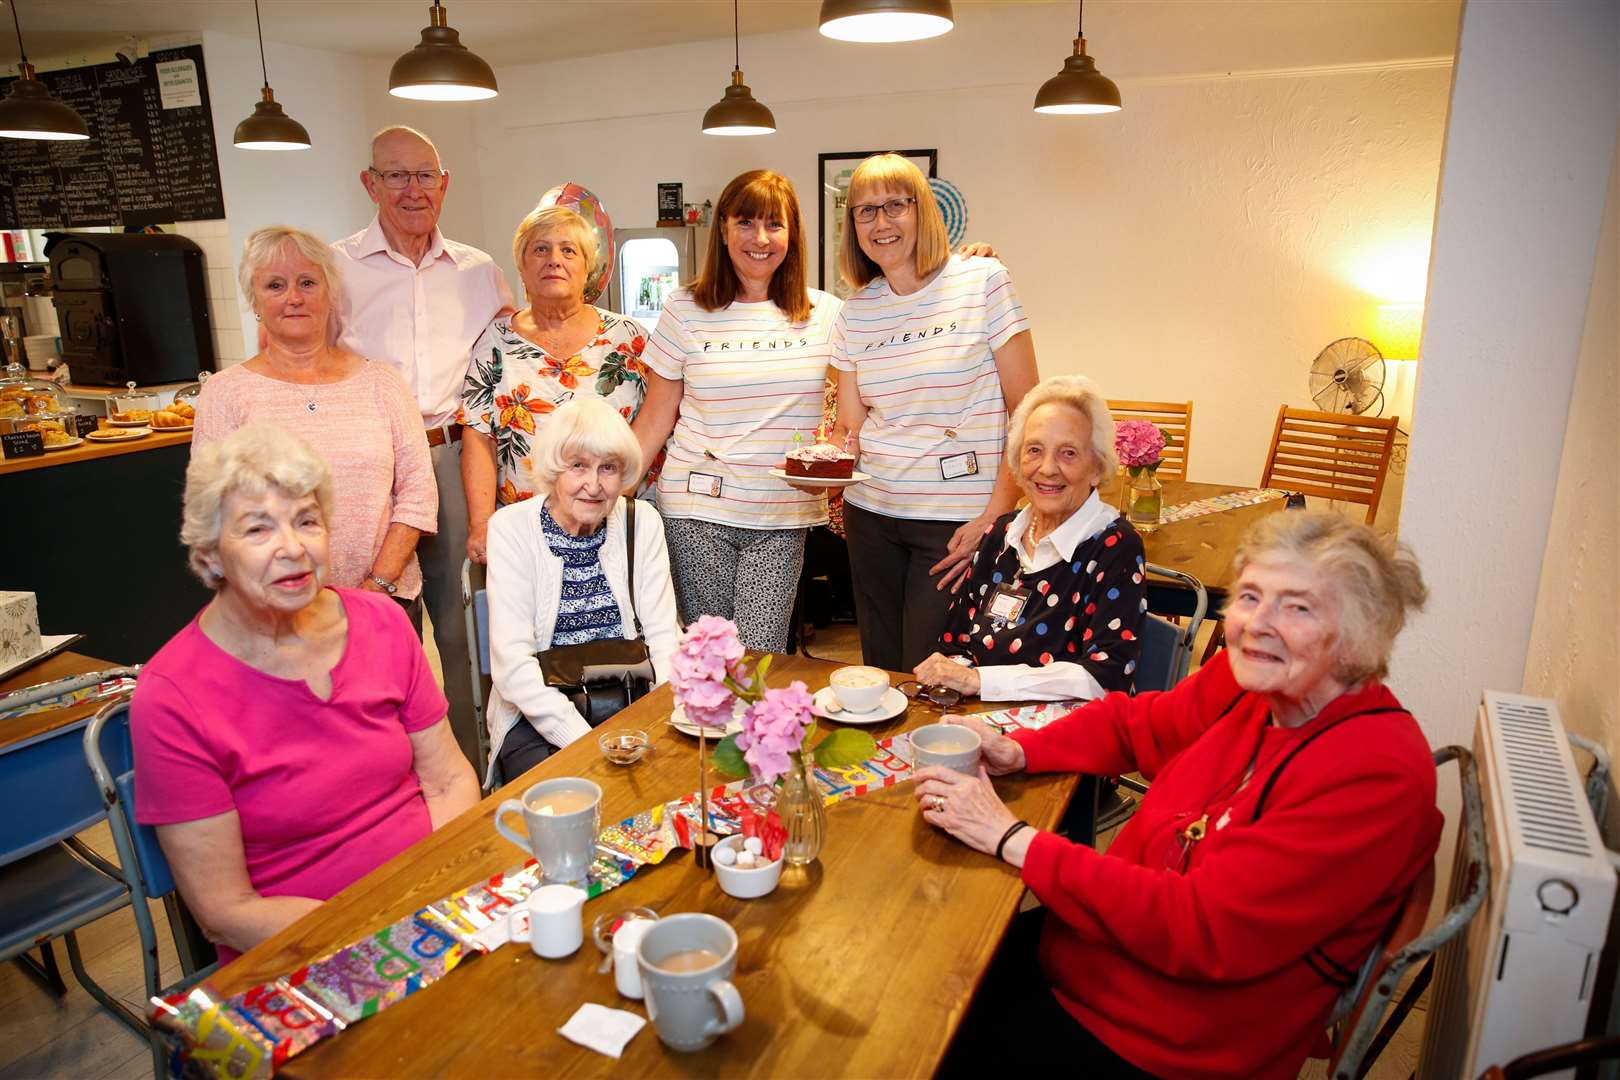 West Kent Befriending Service coffee morning at Harpers Coffee and Gifts, Maidstone. Ann Rhodes, Lorraine Smith-Lowther, Eric Roberts, Sue Miles, Beryl Sutton, Diane Bromley and Wendy Pfeiffer of West Kent Befriending Service, Iris Sheppard and Hilary Juhasz. Picture: Matthew Walker. (13546010)